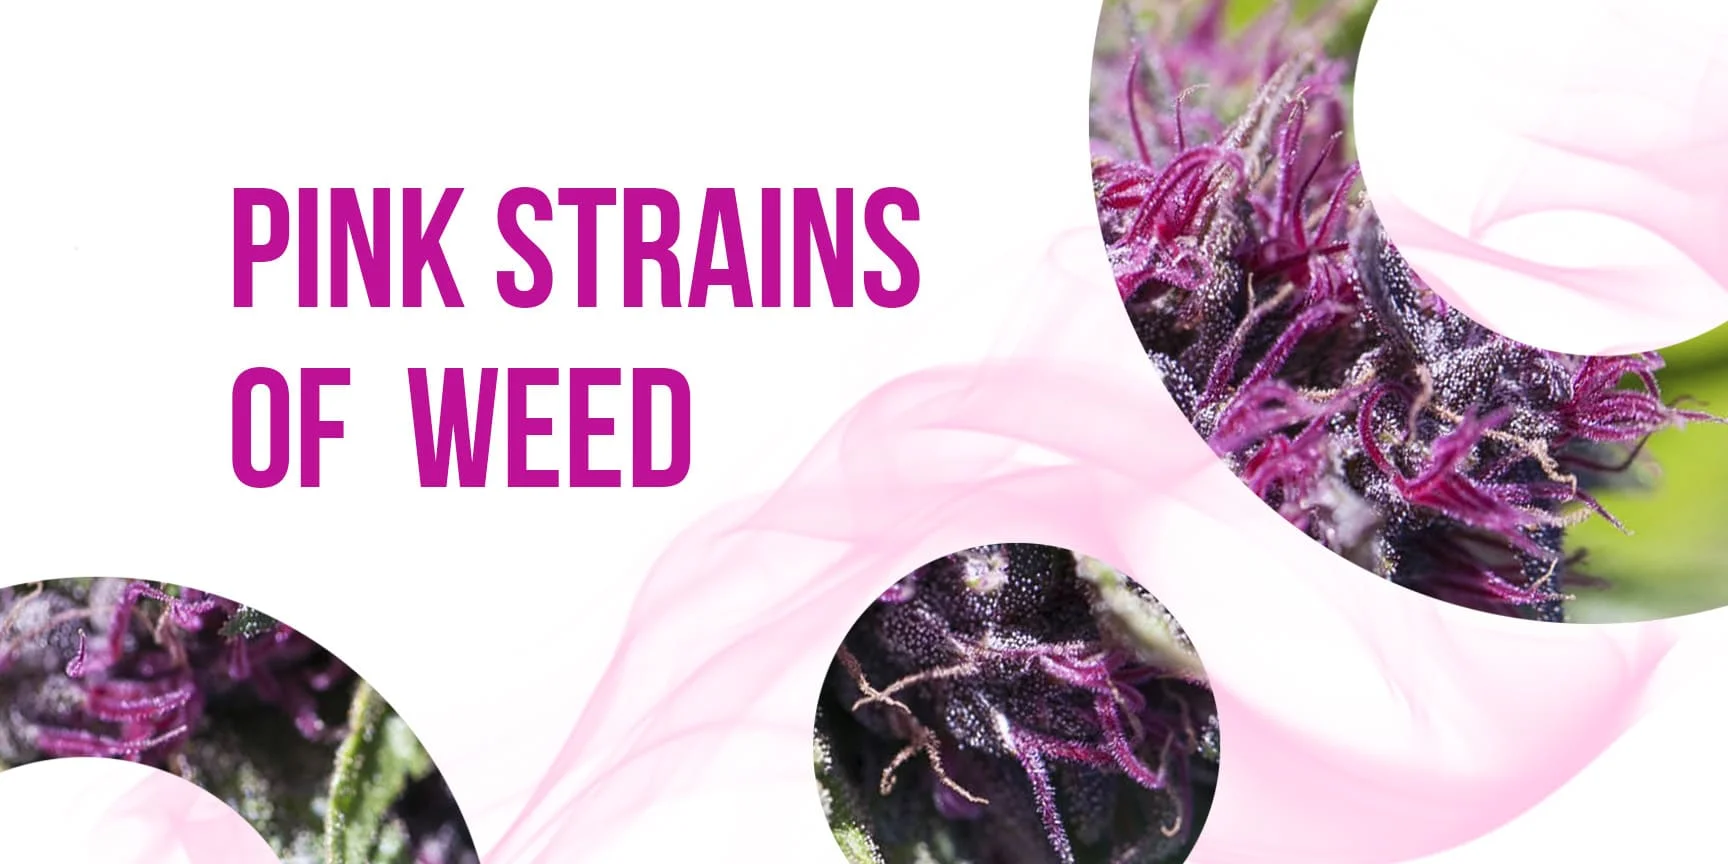 Cannabis buds and lettering "Pink strains of weed"